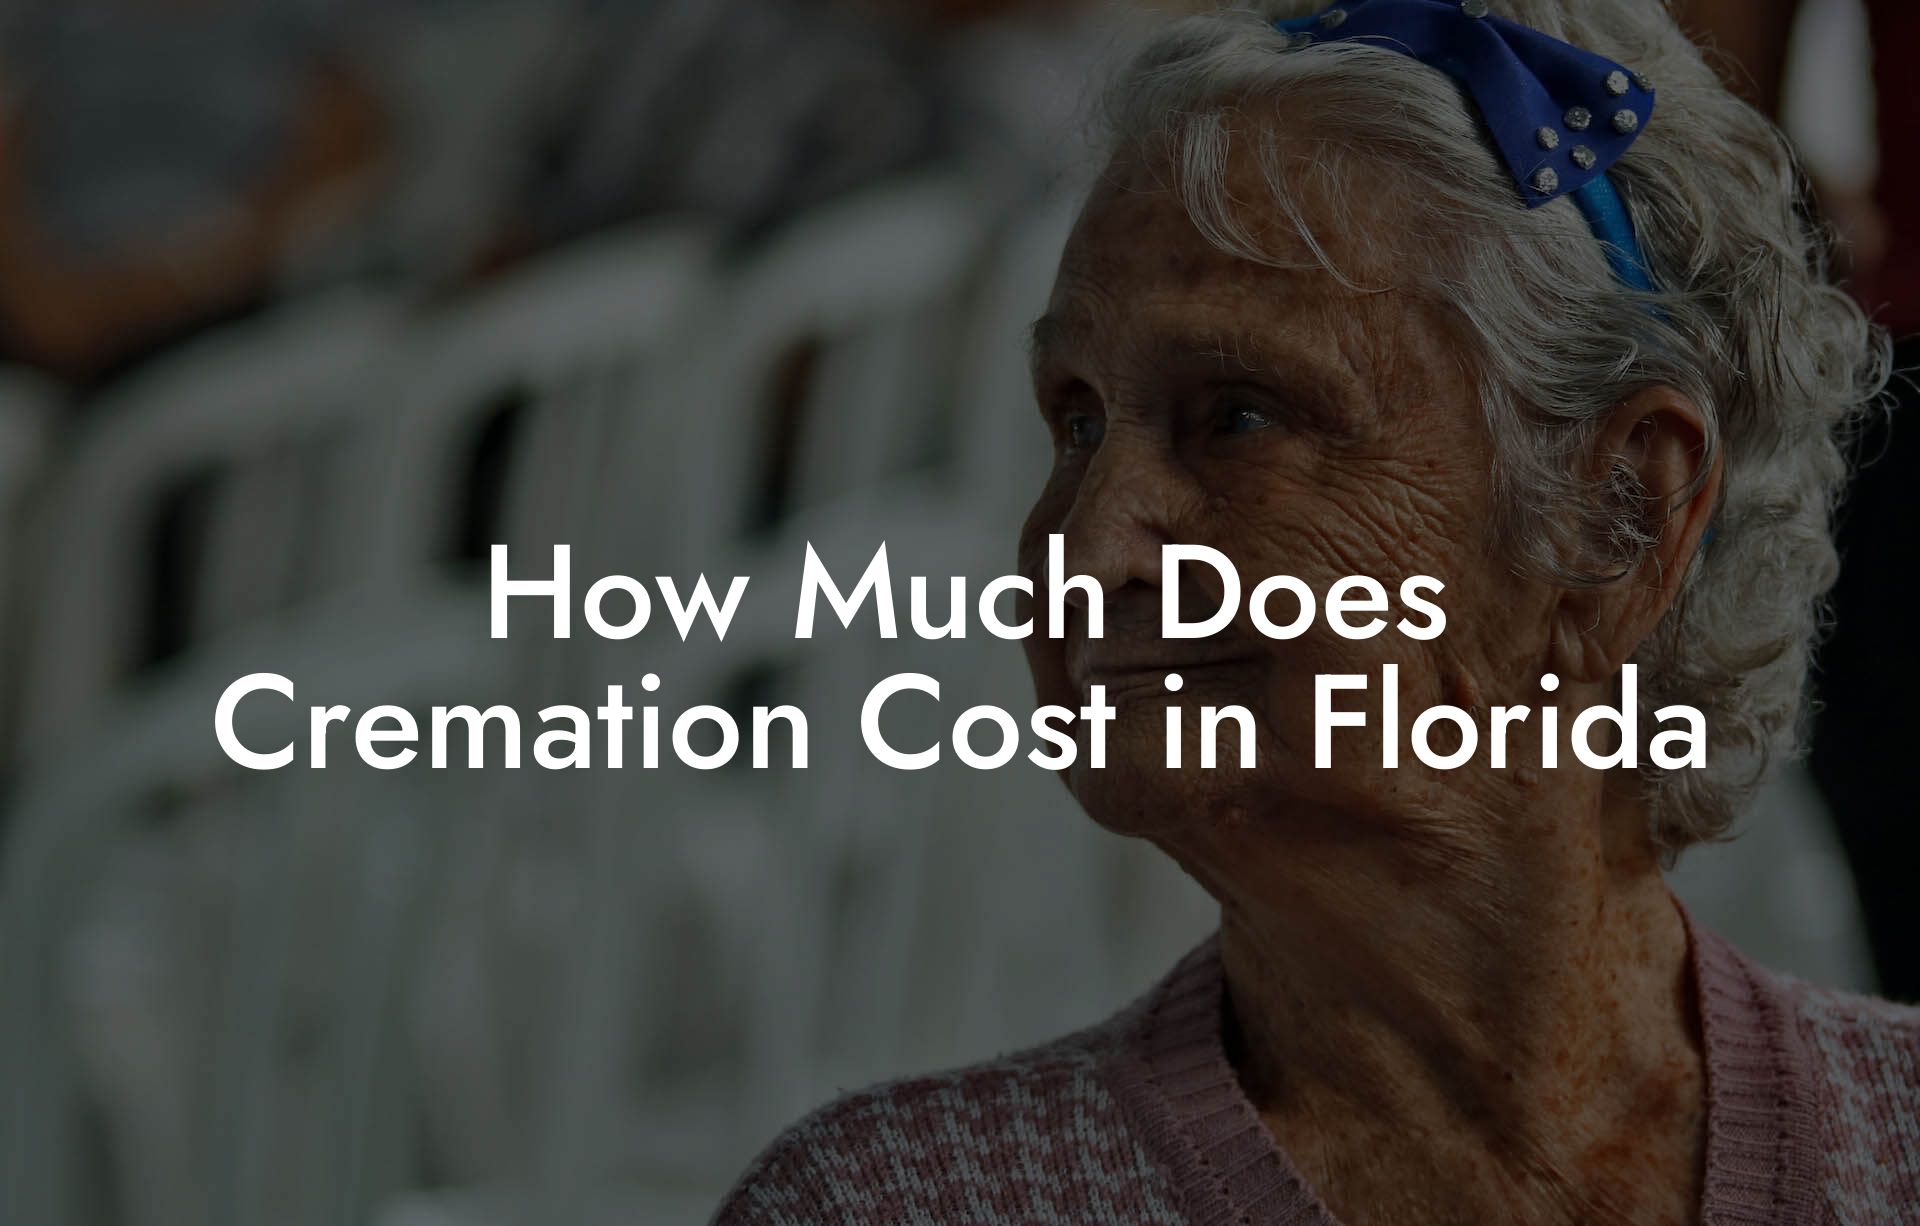 How Much Does Cremation Cost in Florida